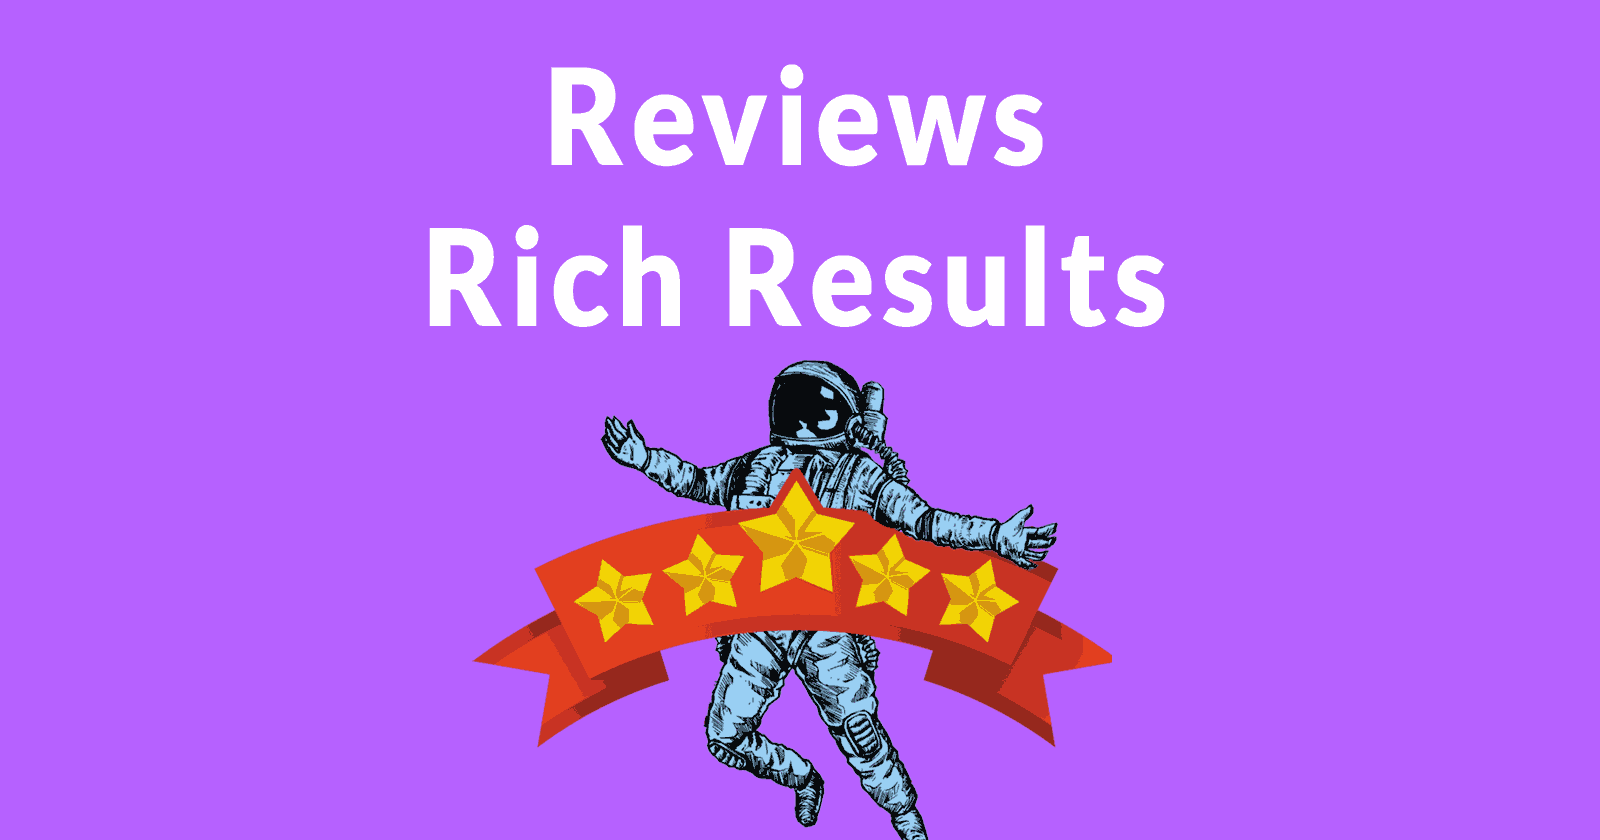 The phrase, "Reviews Rich Results" with an image of an astronaut floating in space, with a ribbon containing five golden stars.